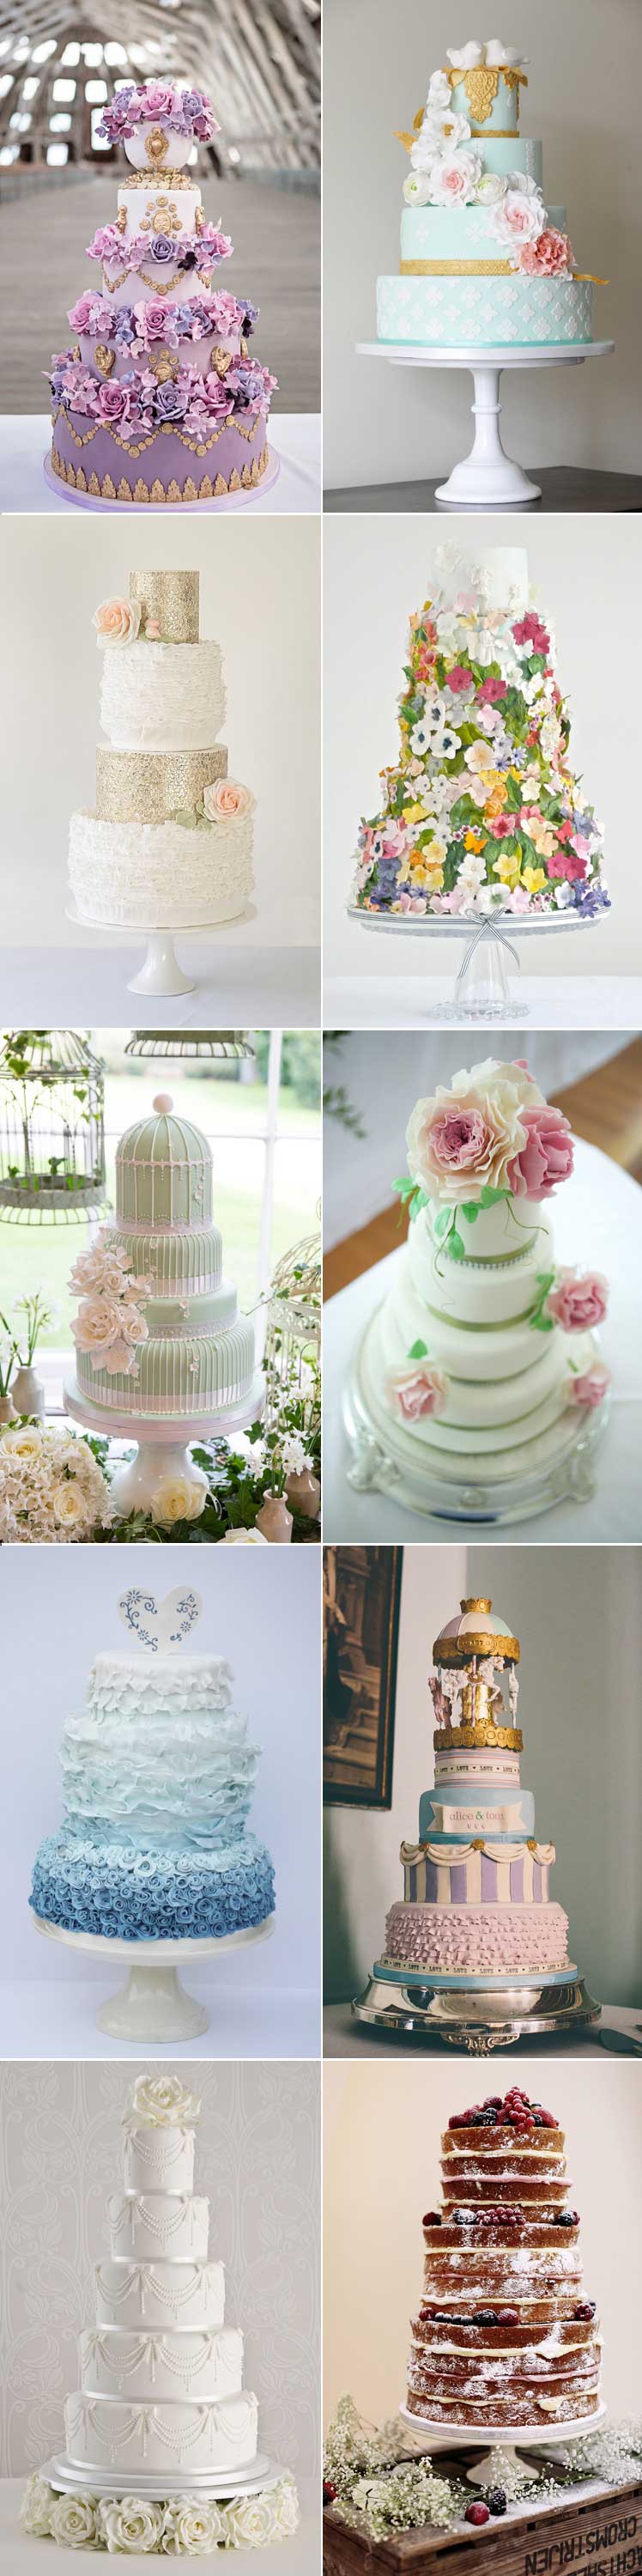 10 of the most amazing wedding cakes